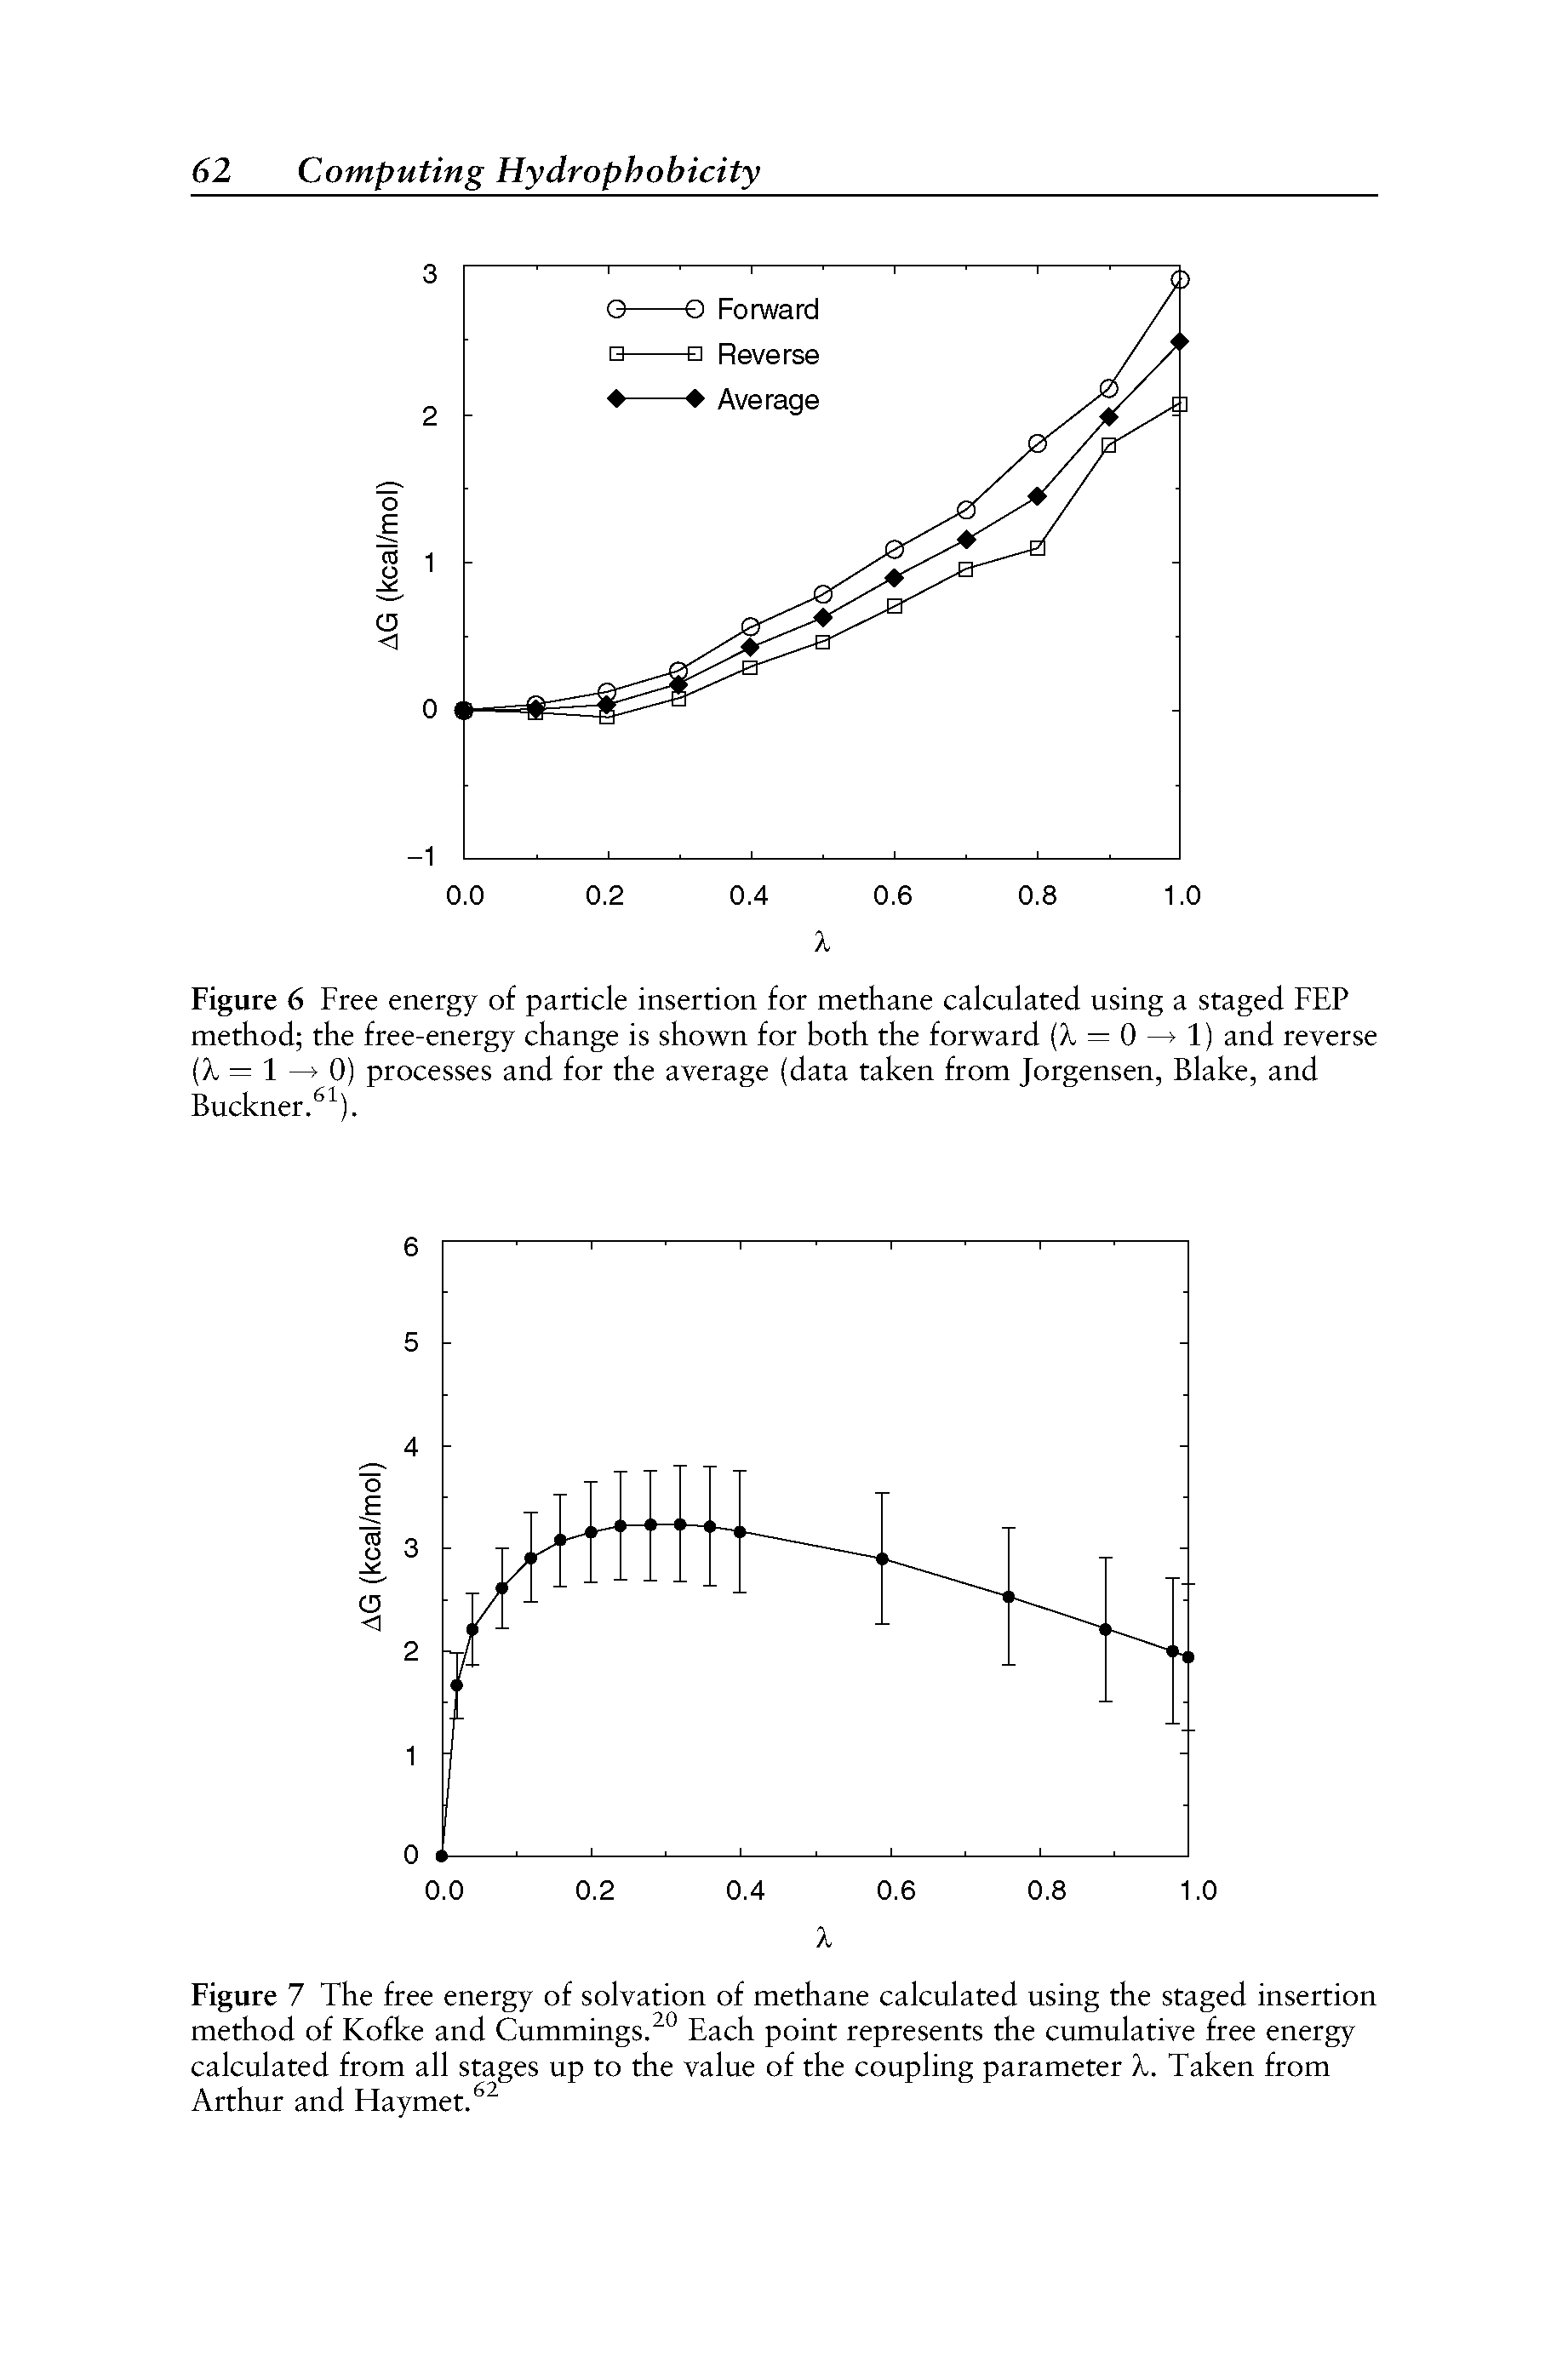 Figure 6 Free energy of particle insertion for methane calculated using a staged FEP method the free-energy change is shown for both the forward (X = 0 1) and reverse (X = 1 0) processes and for the average (data taken from Jorgensen, Blake, and Buckner. ).